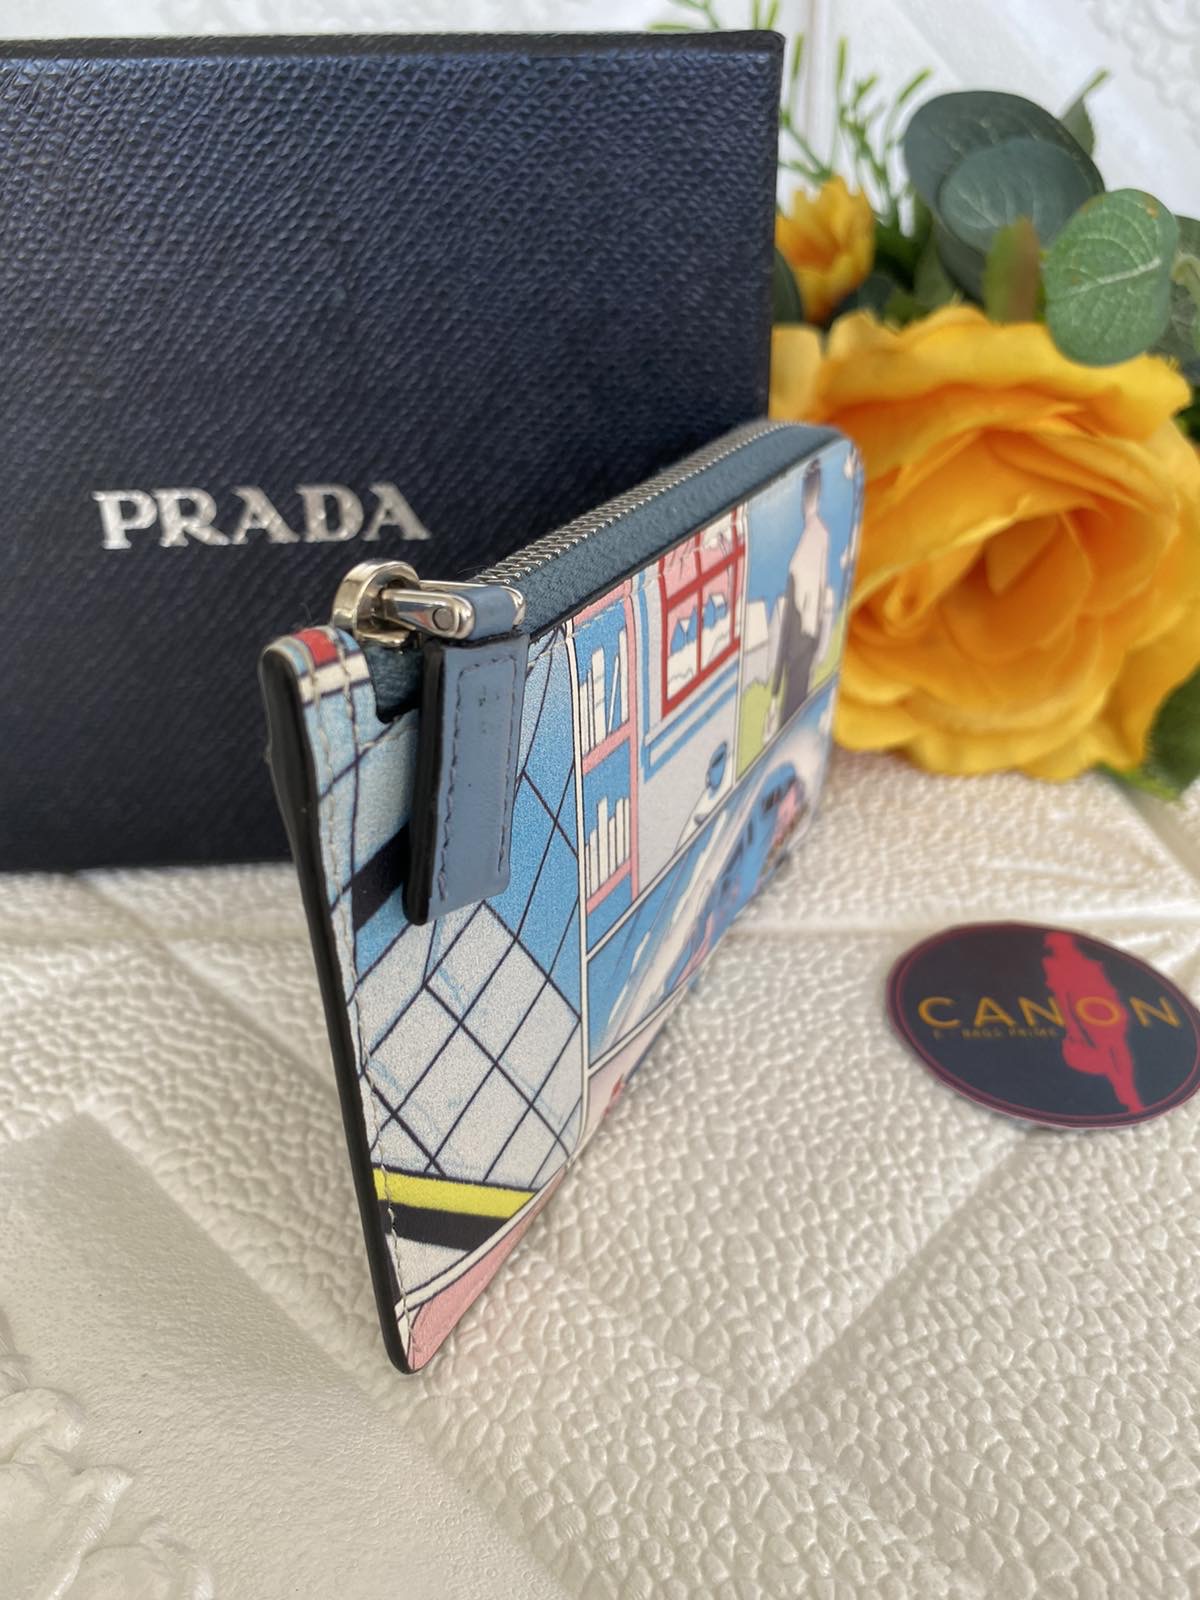 Should I wear my Prada purse even if the logo fell off of it? - Quora